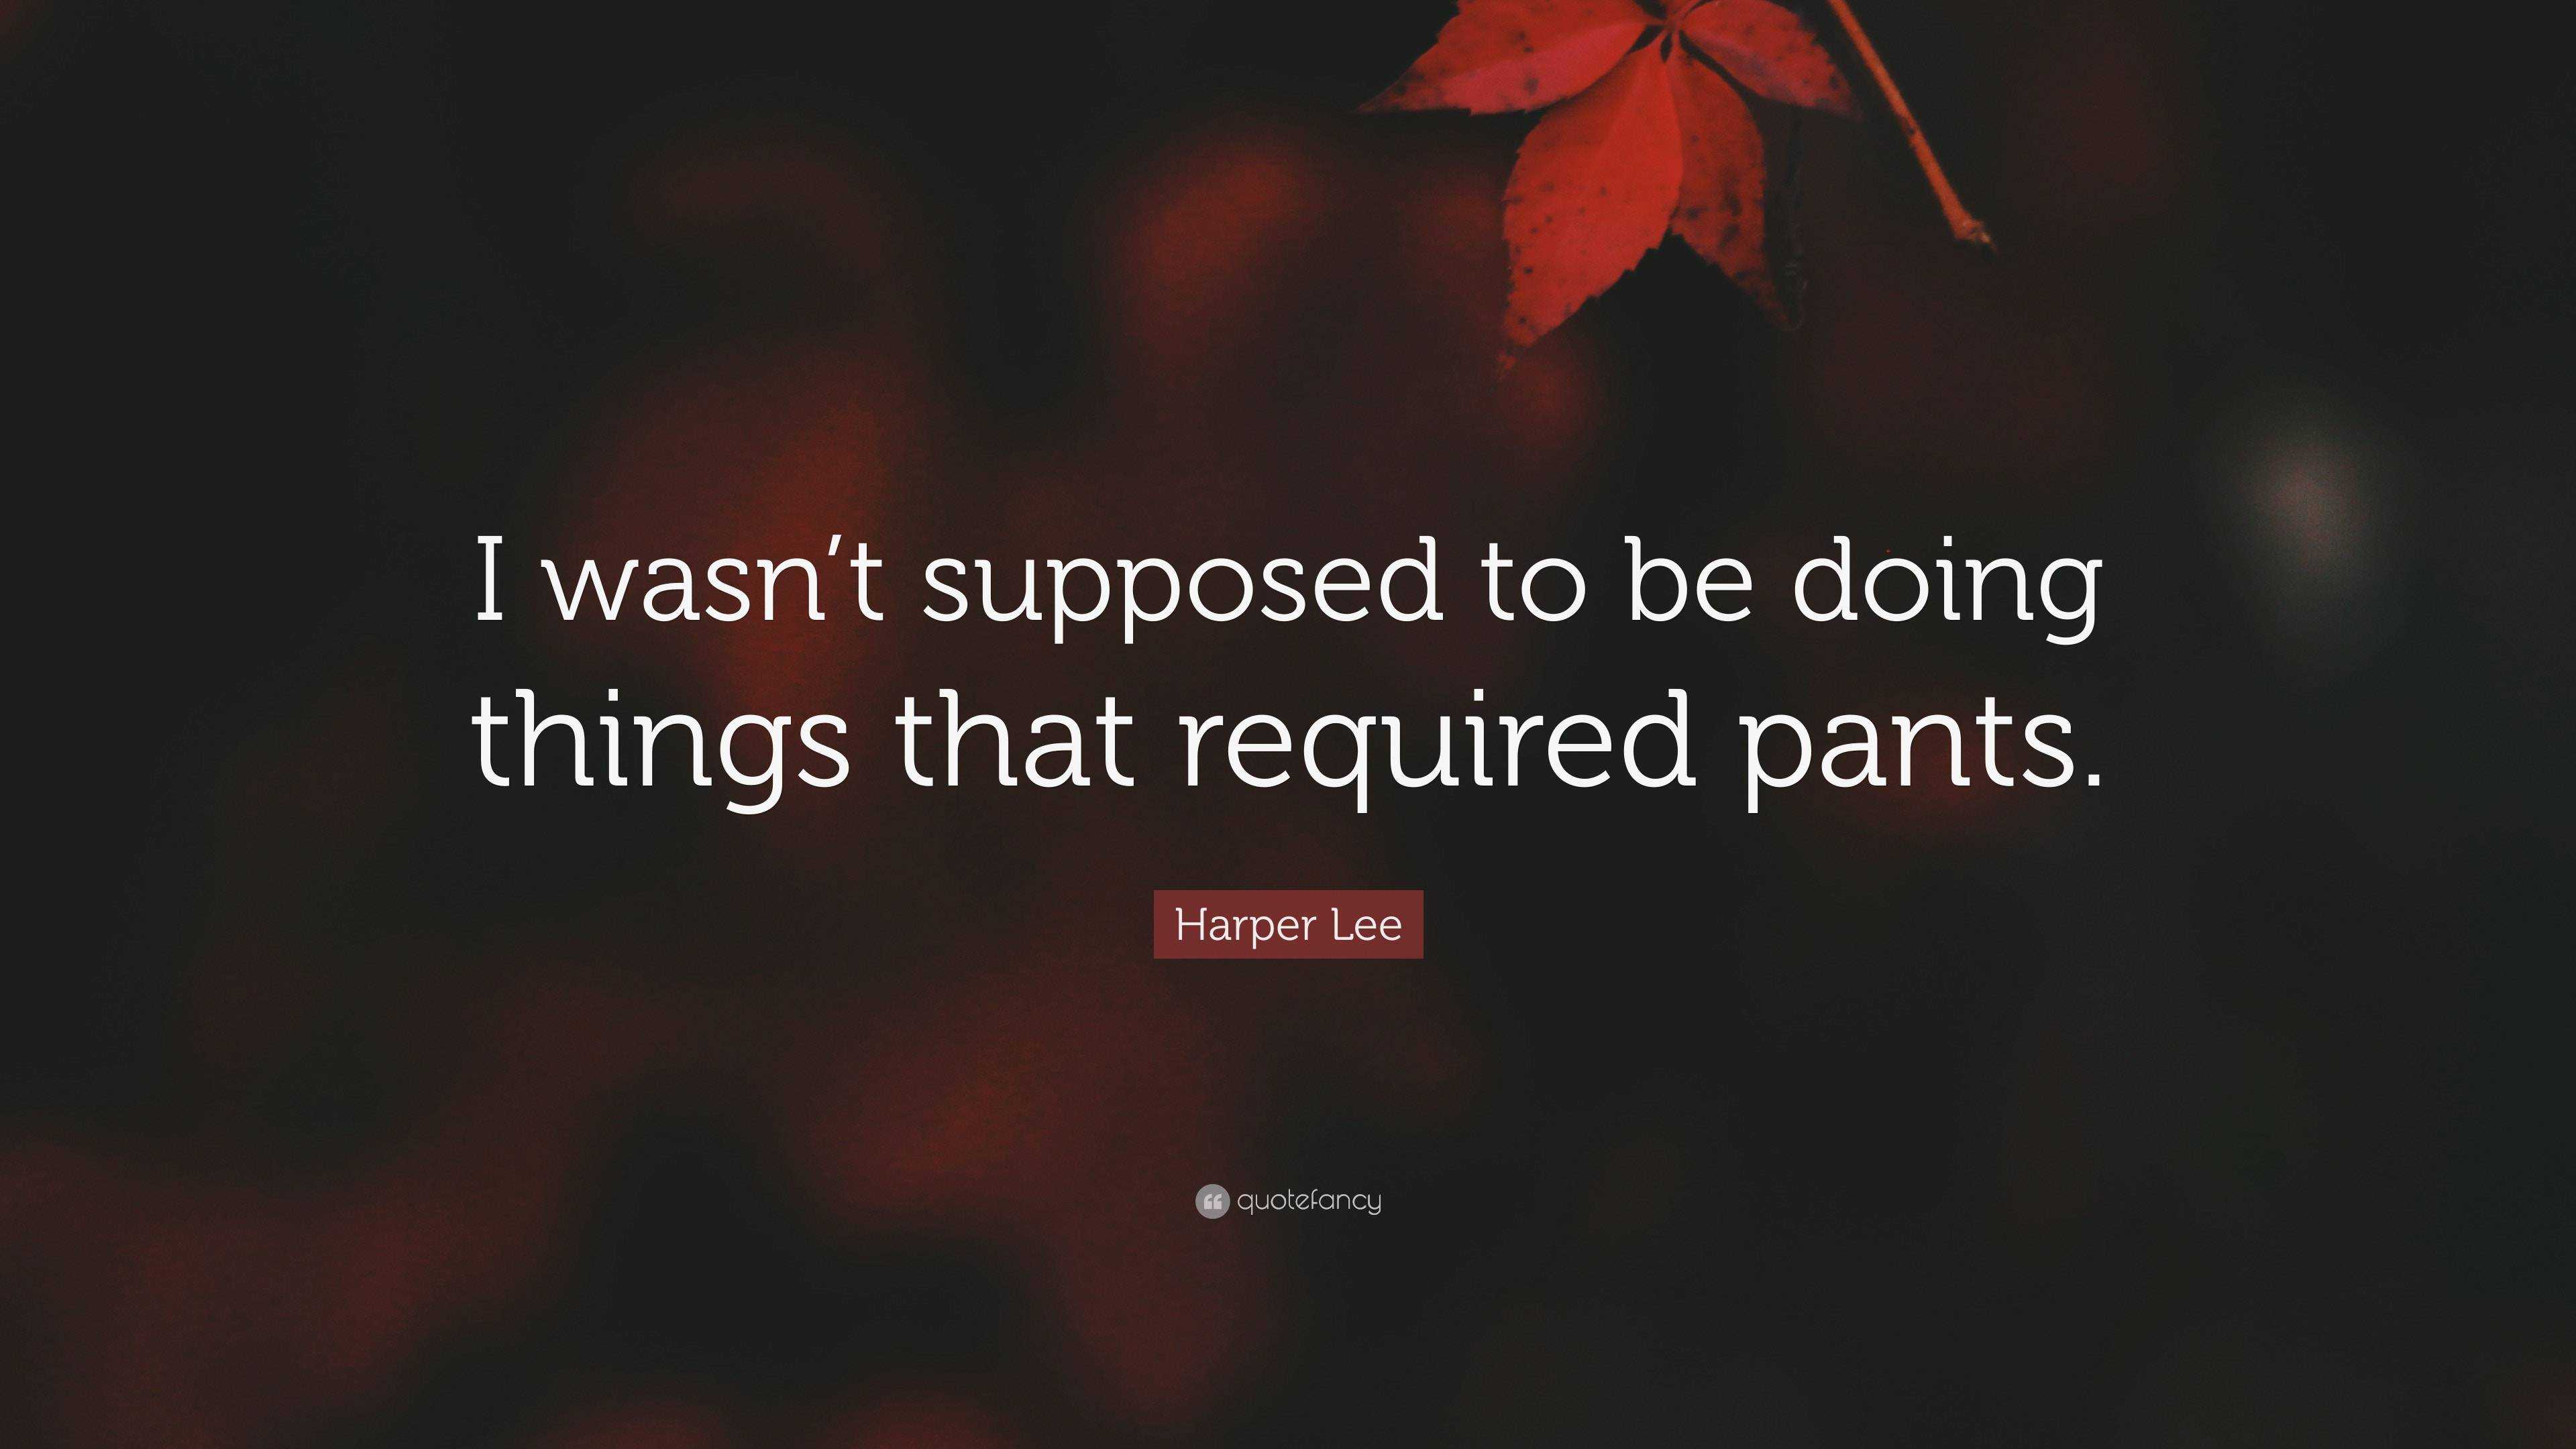 Harper Lee Quote: “Where are your pants, son?”